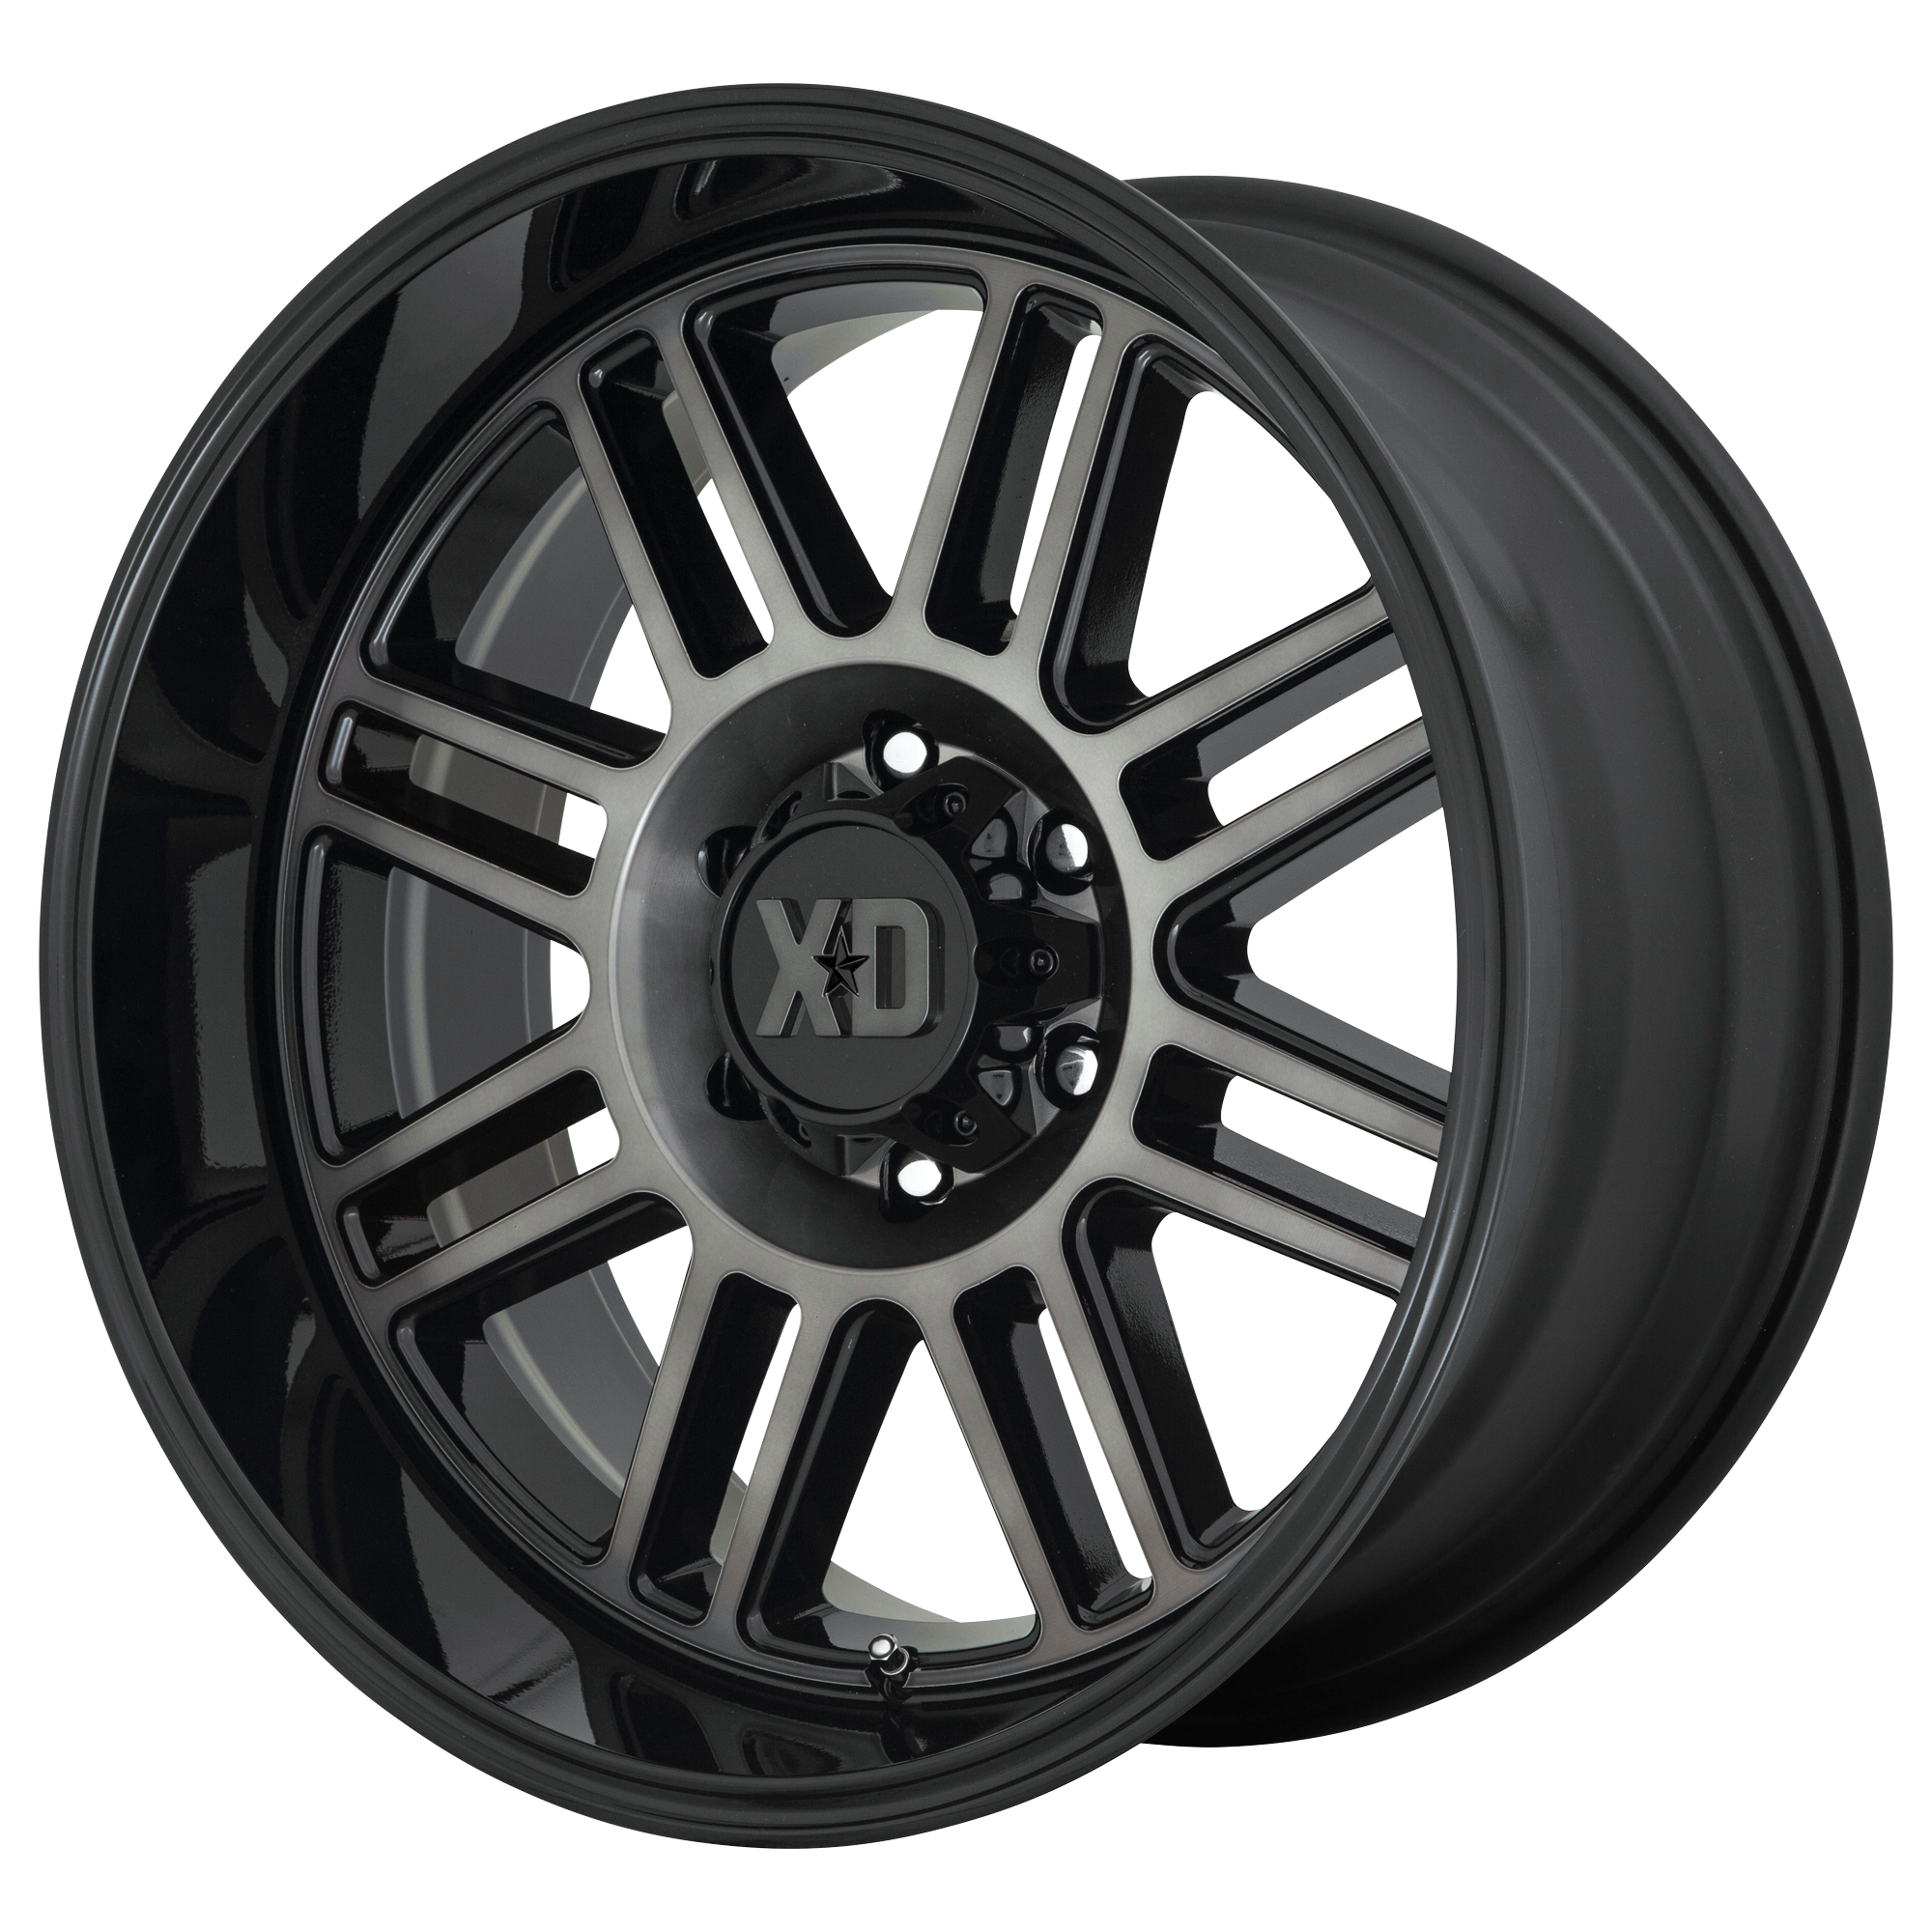 XD XD850 CAGE GLOSS BLACK WITH GRAY TINT WHEELS | 22X10 | 6X139.7 | OFFSET: -18MM | CB: 106.1MM